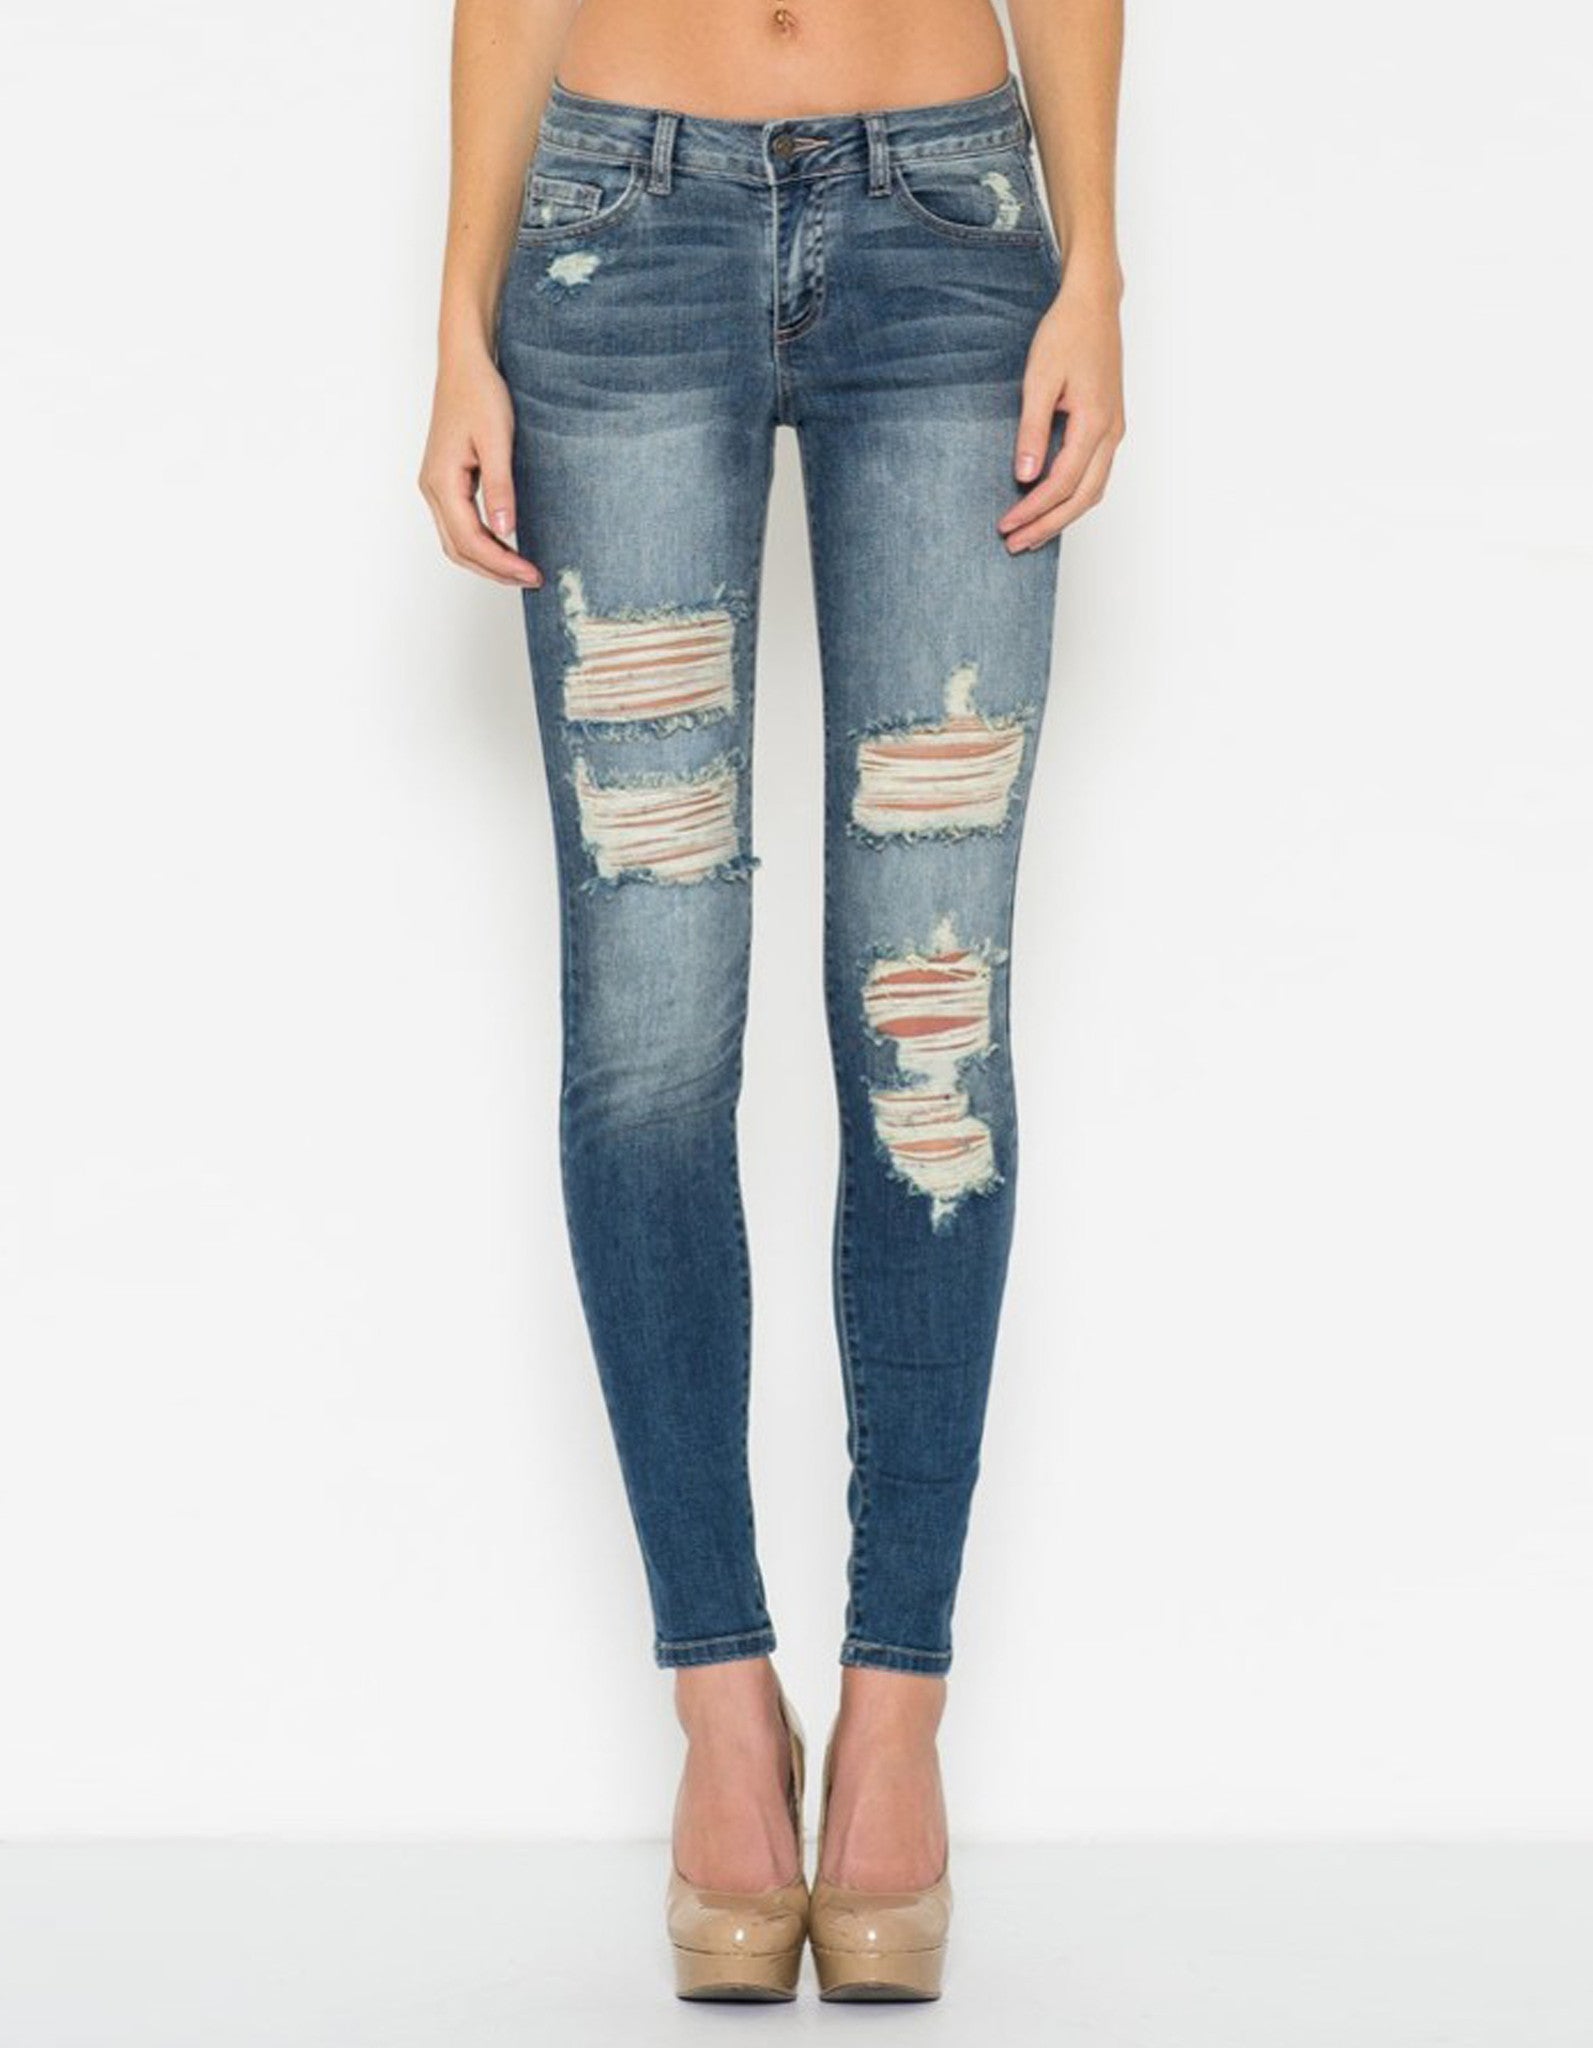 Ripped Skinny Jean with Dark Blue Wash